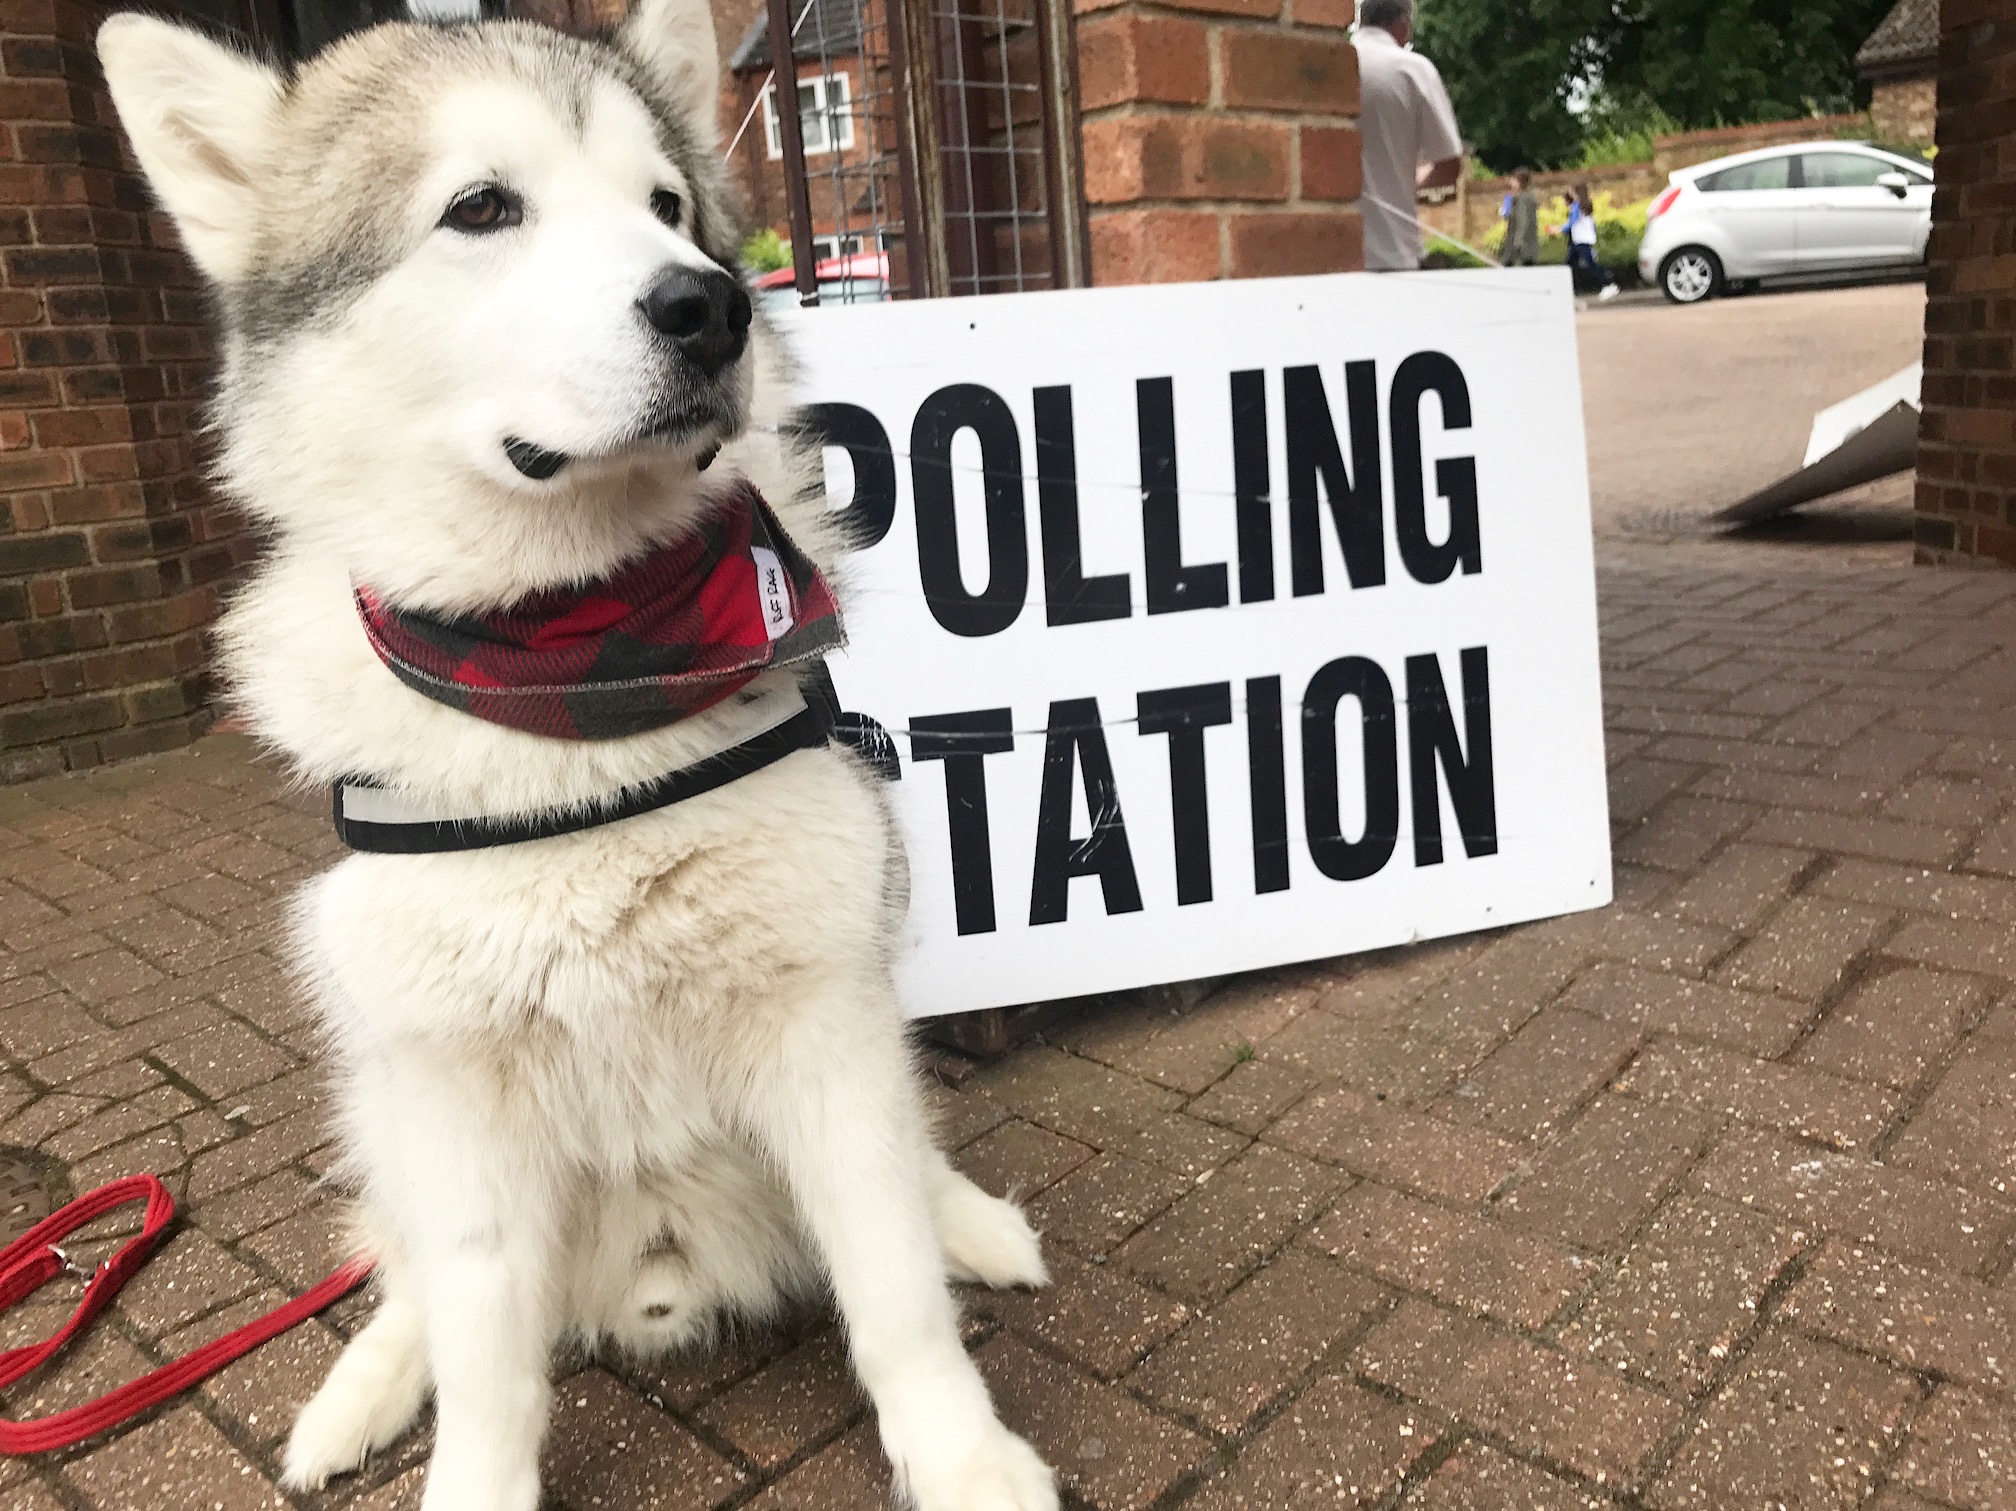 An Alaskan malamute sits by a polling station sign